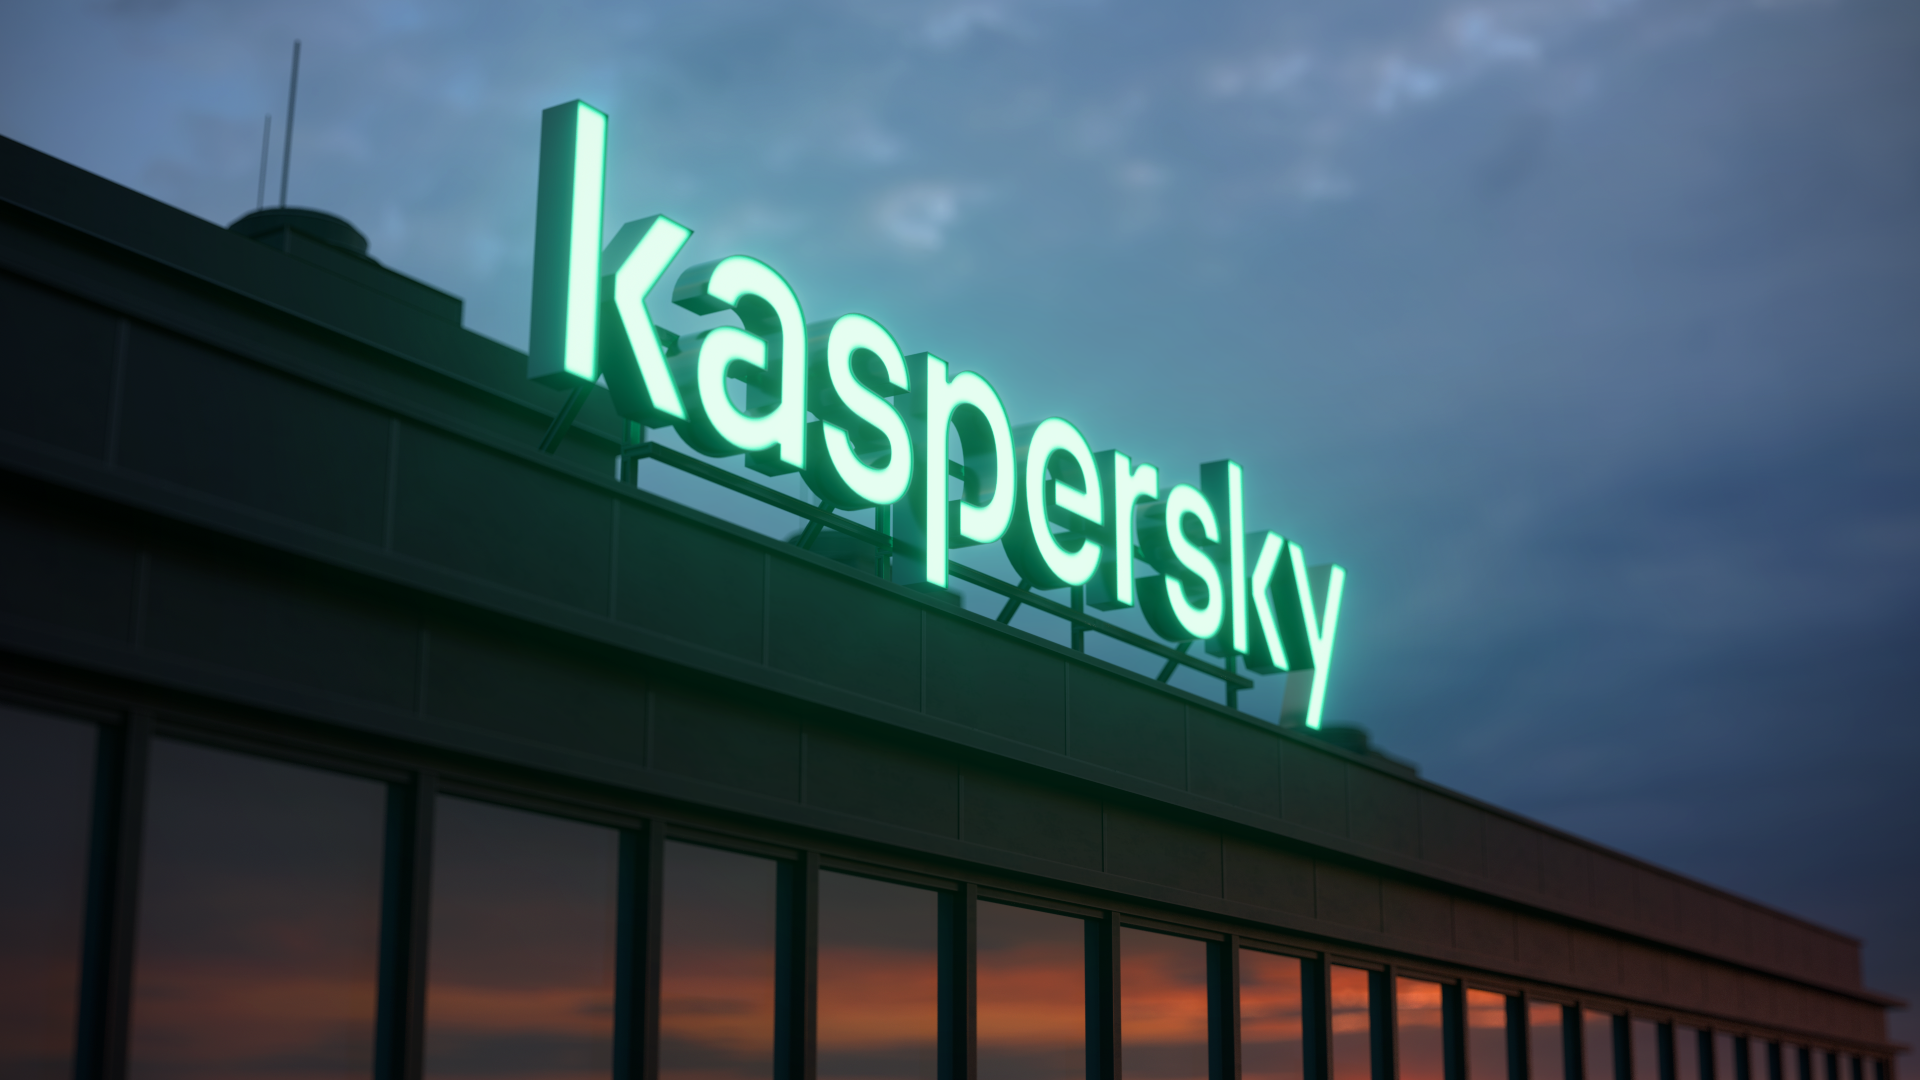 Increase in malware attacks makes cybersecurity more relevant than ever - Kaspersky Lab in Azerbaijan